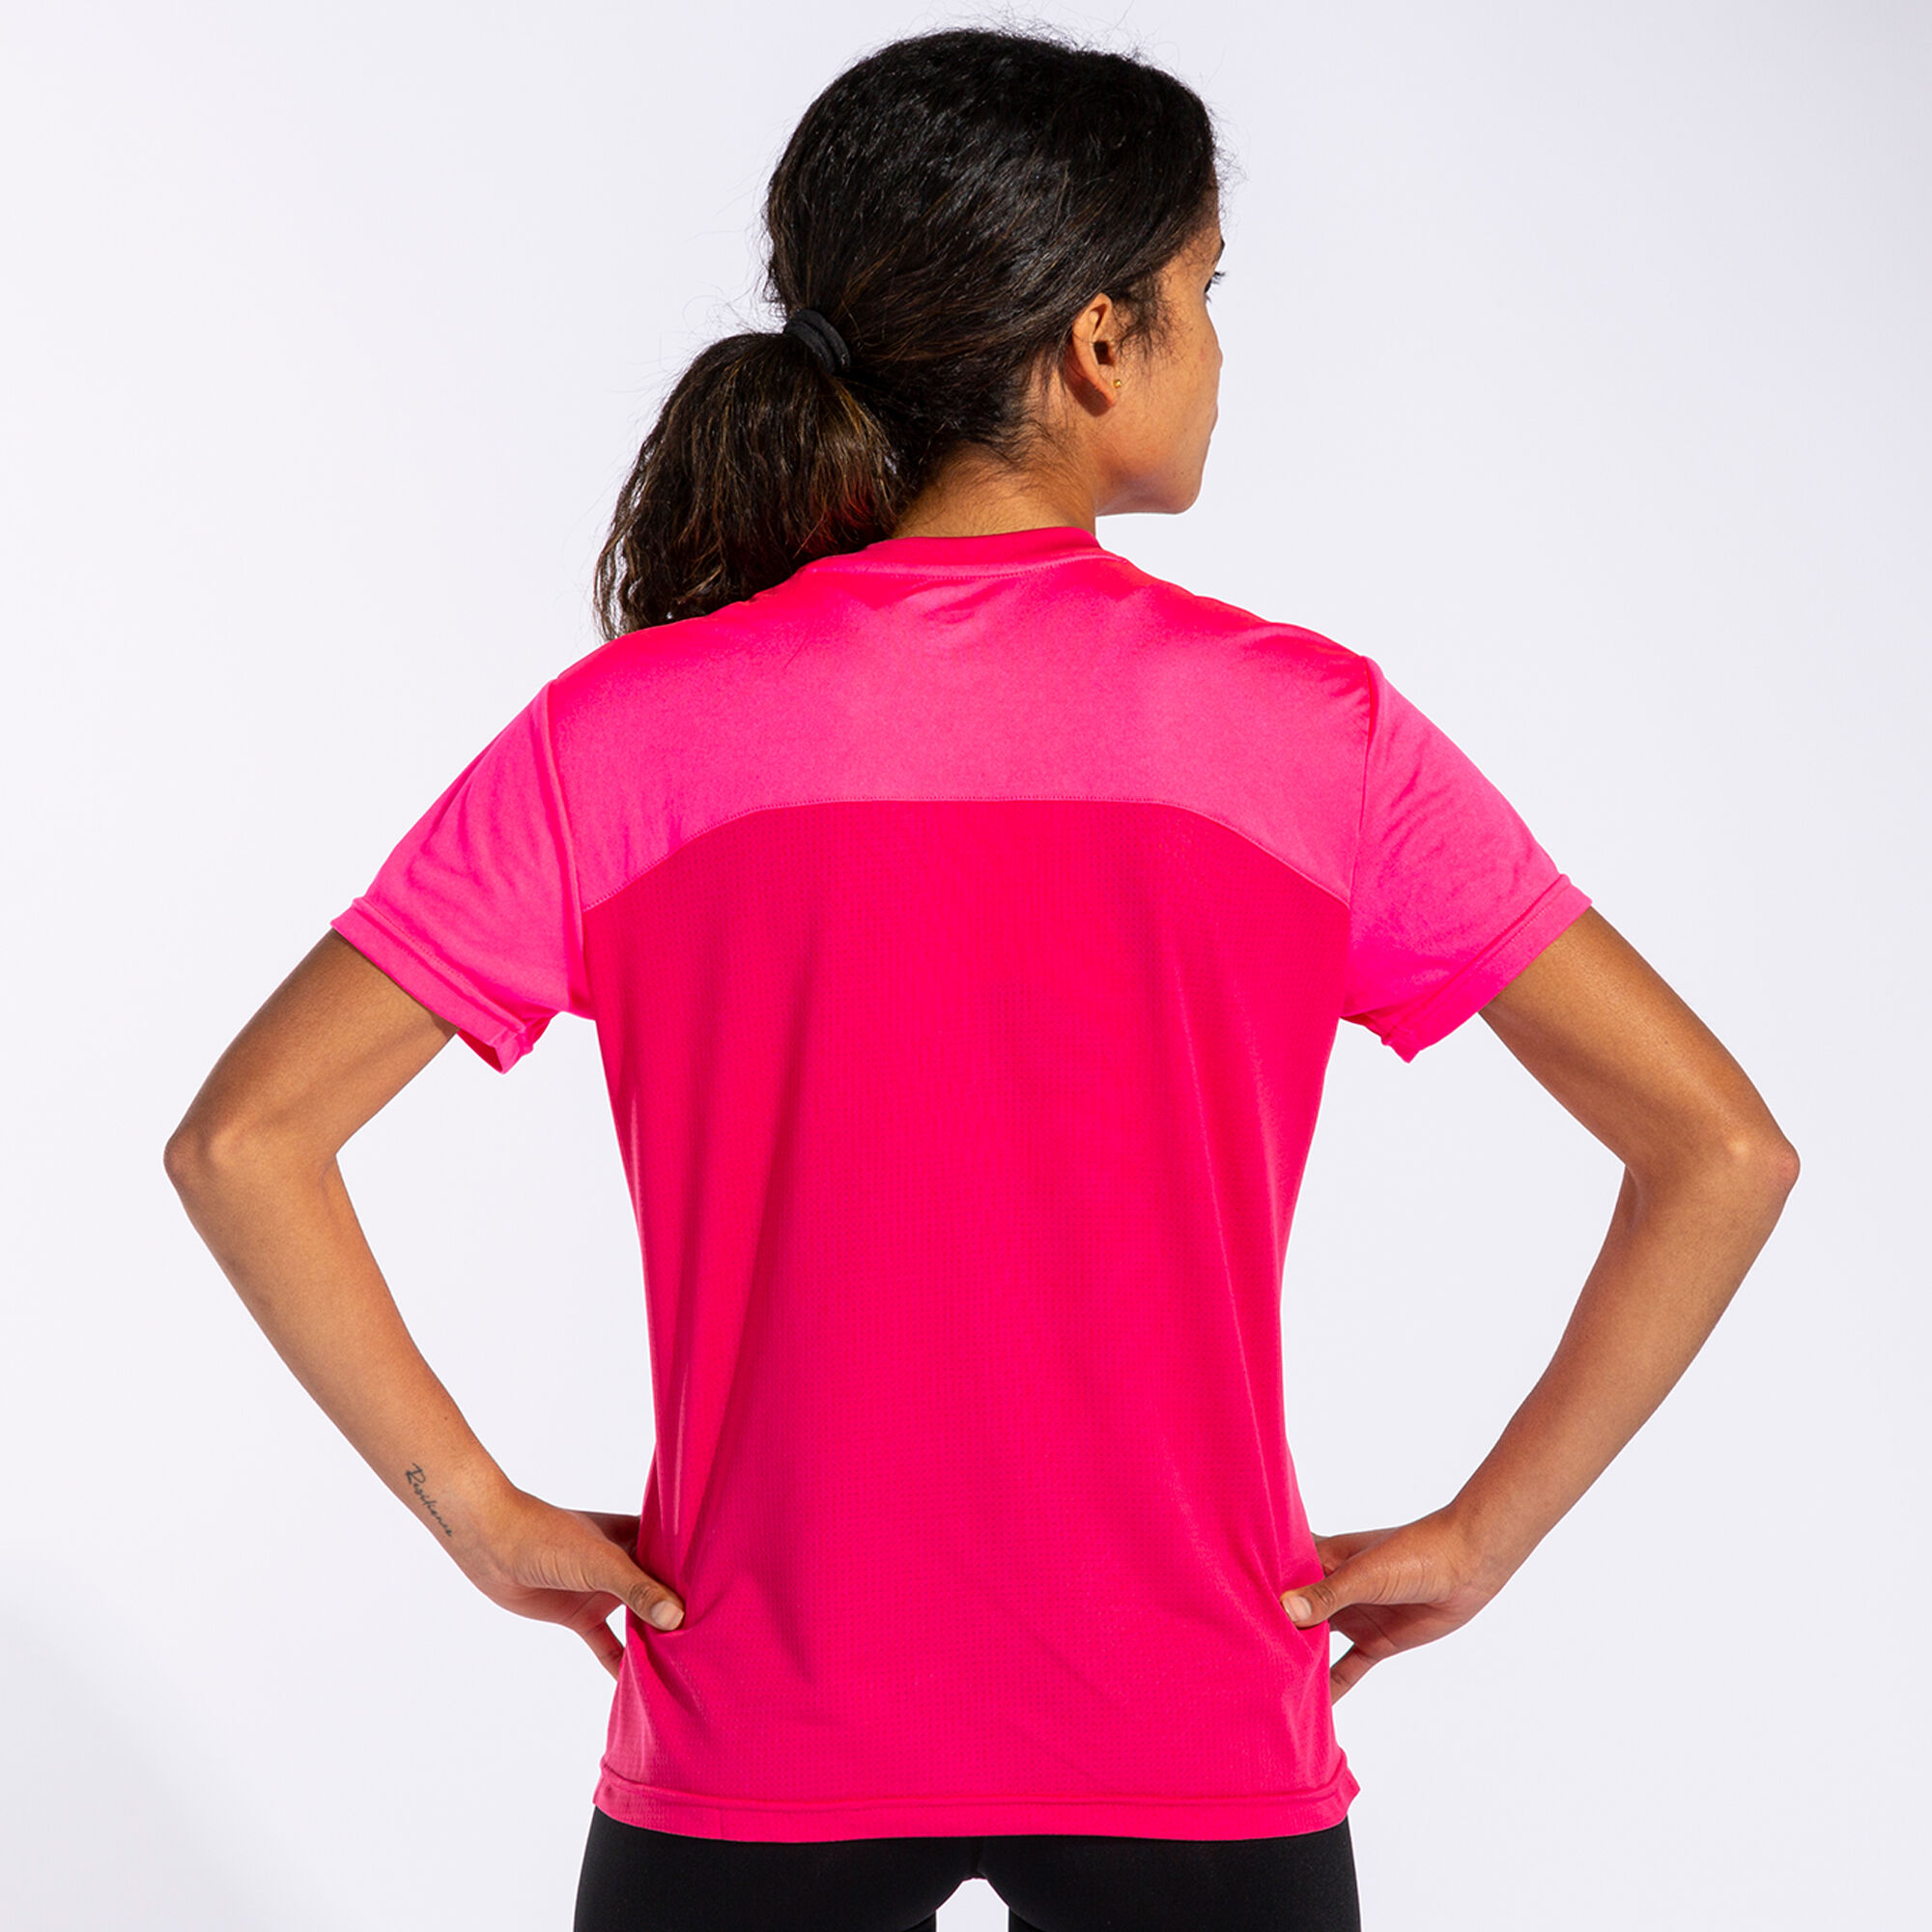 Maillot manches courtes femme Winner II rose fluo